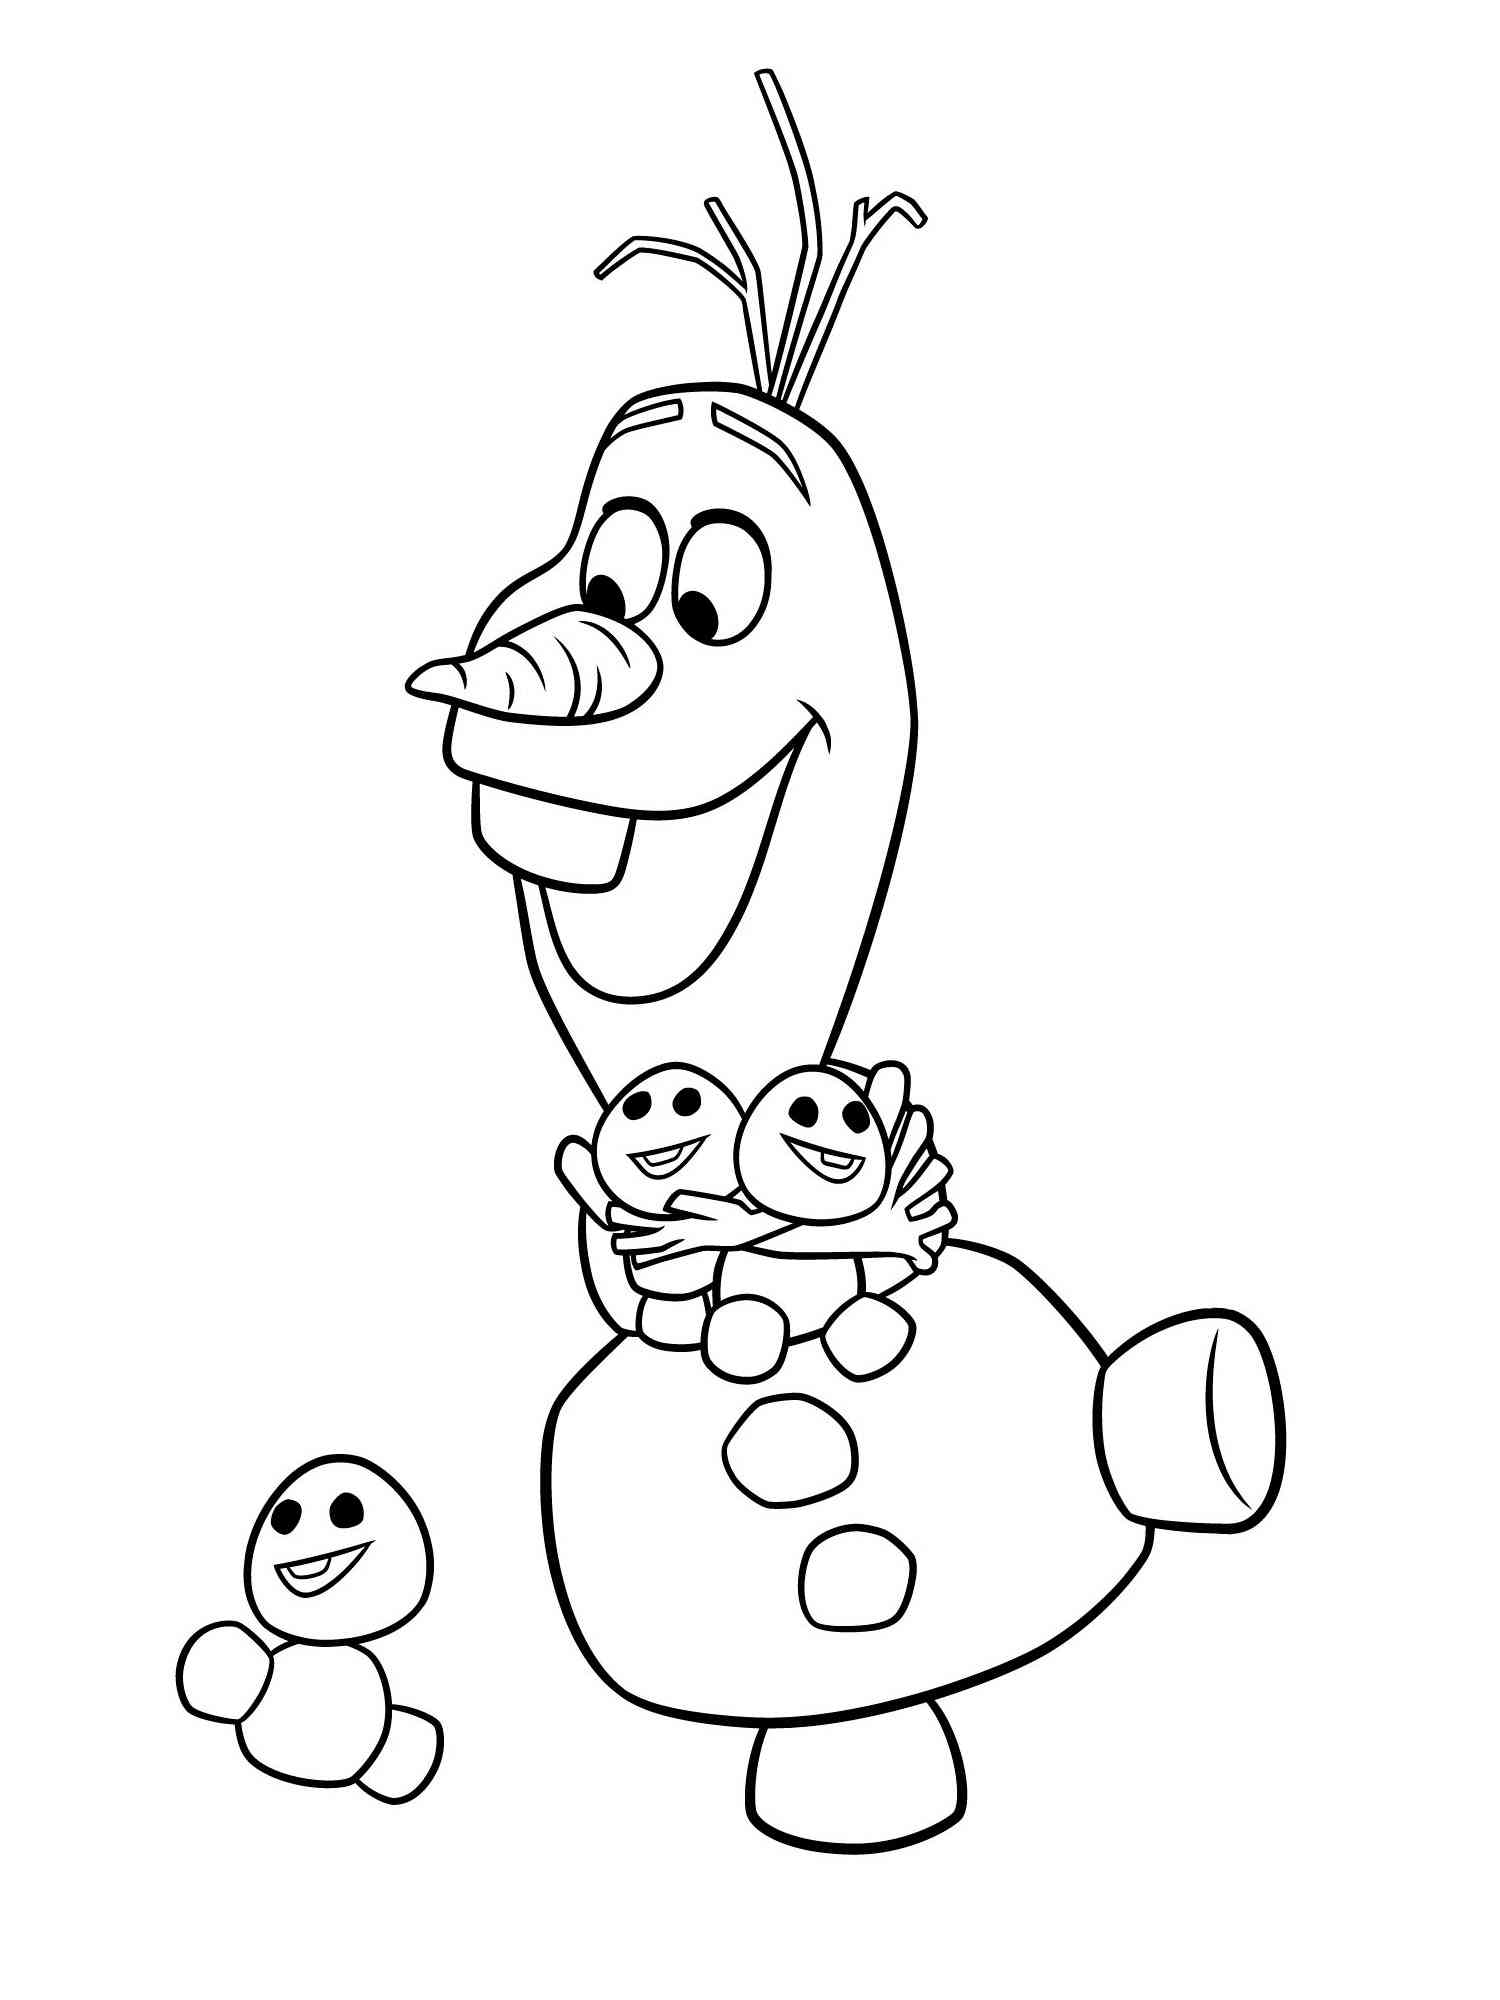 Frozen 7 coloring page